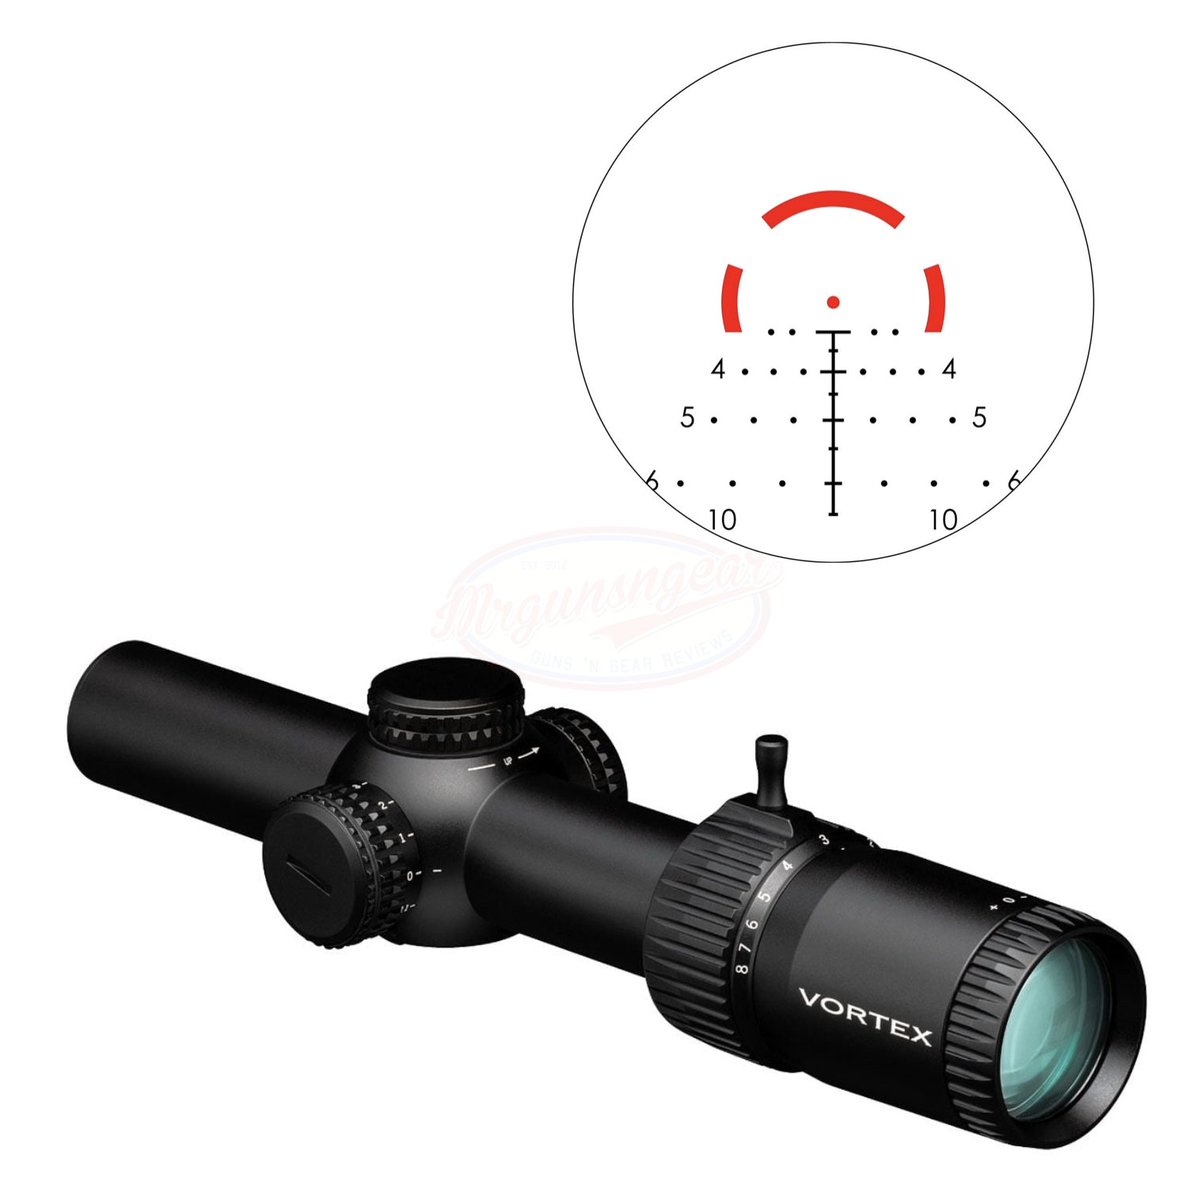 Vortex Optics Gen2 Strike Eagle 1-8x scope with integral throw lever and etched illuminated BDC3 reticle for $219/ea with code 'SE18' currently here: mrgunsngear.org/4boNdQ2

Cheapest I've seen it by far - in stock as of this post 🦅🔴🔎